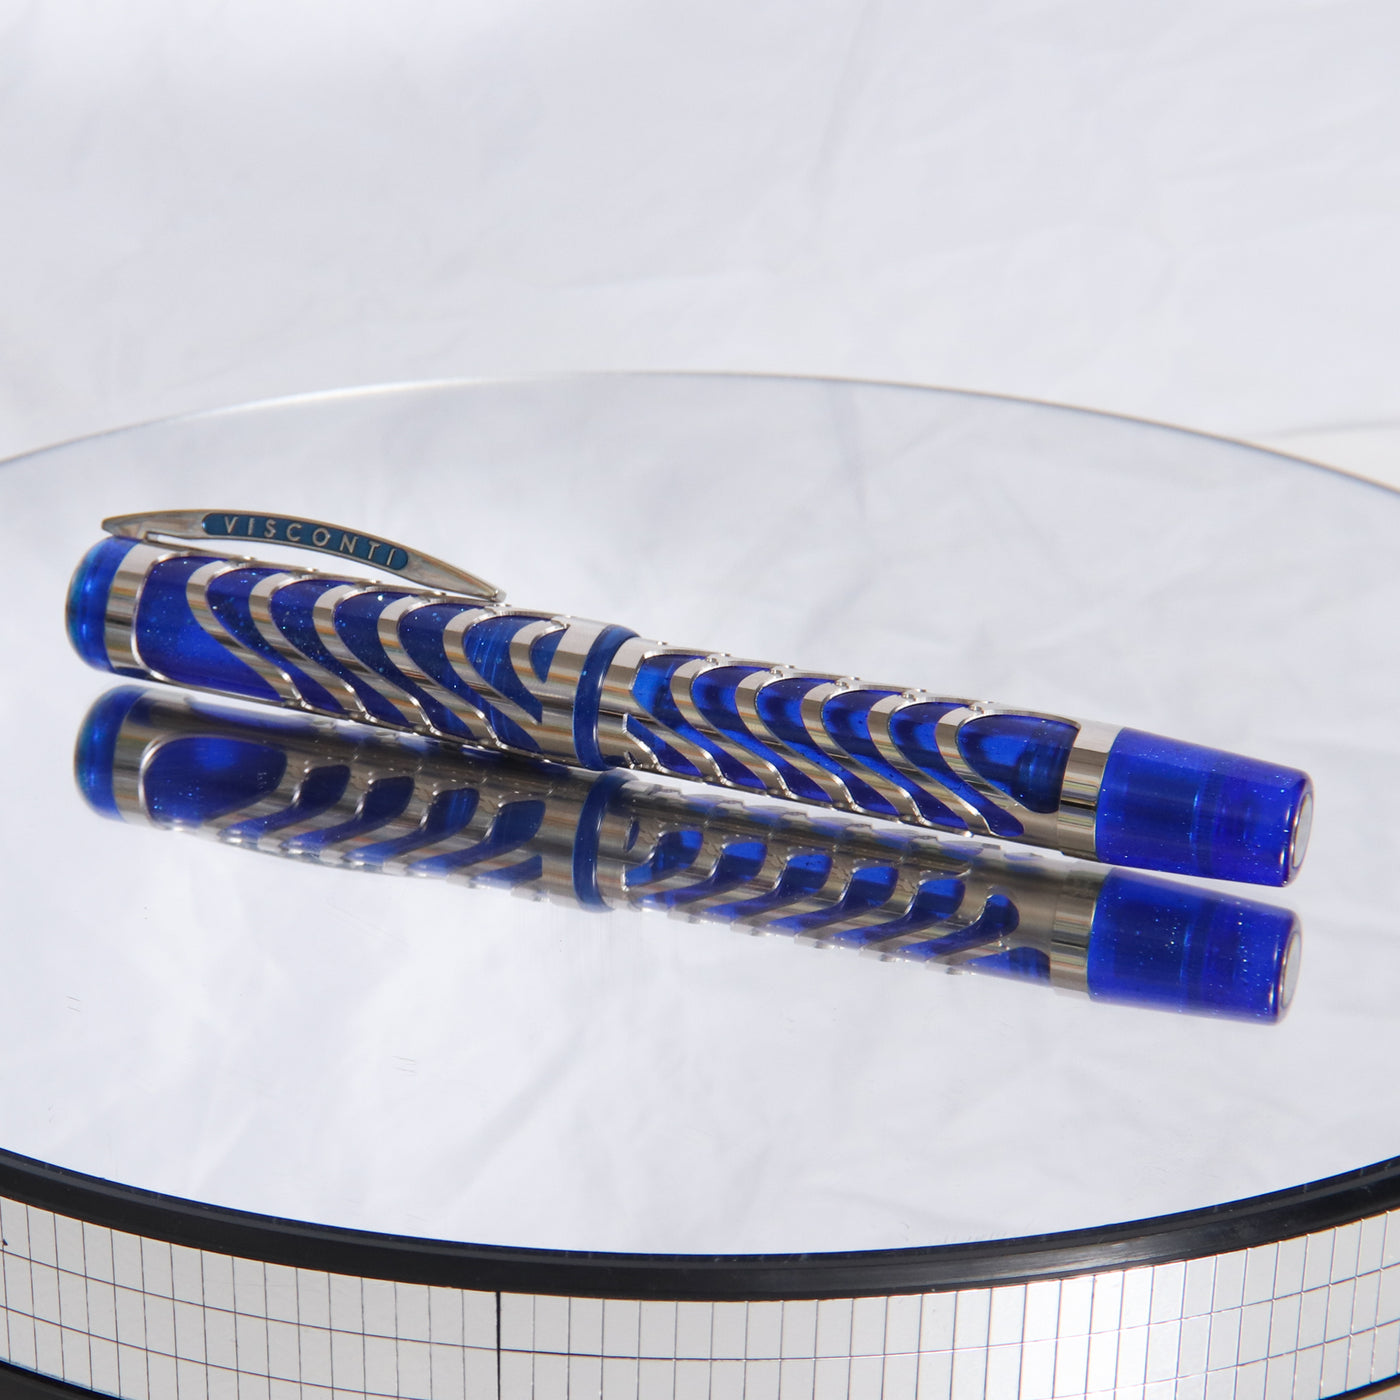 Visconti Skeleton Limited Edition Sapphire Blue Fountain Pen Capped